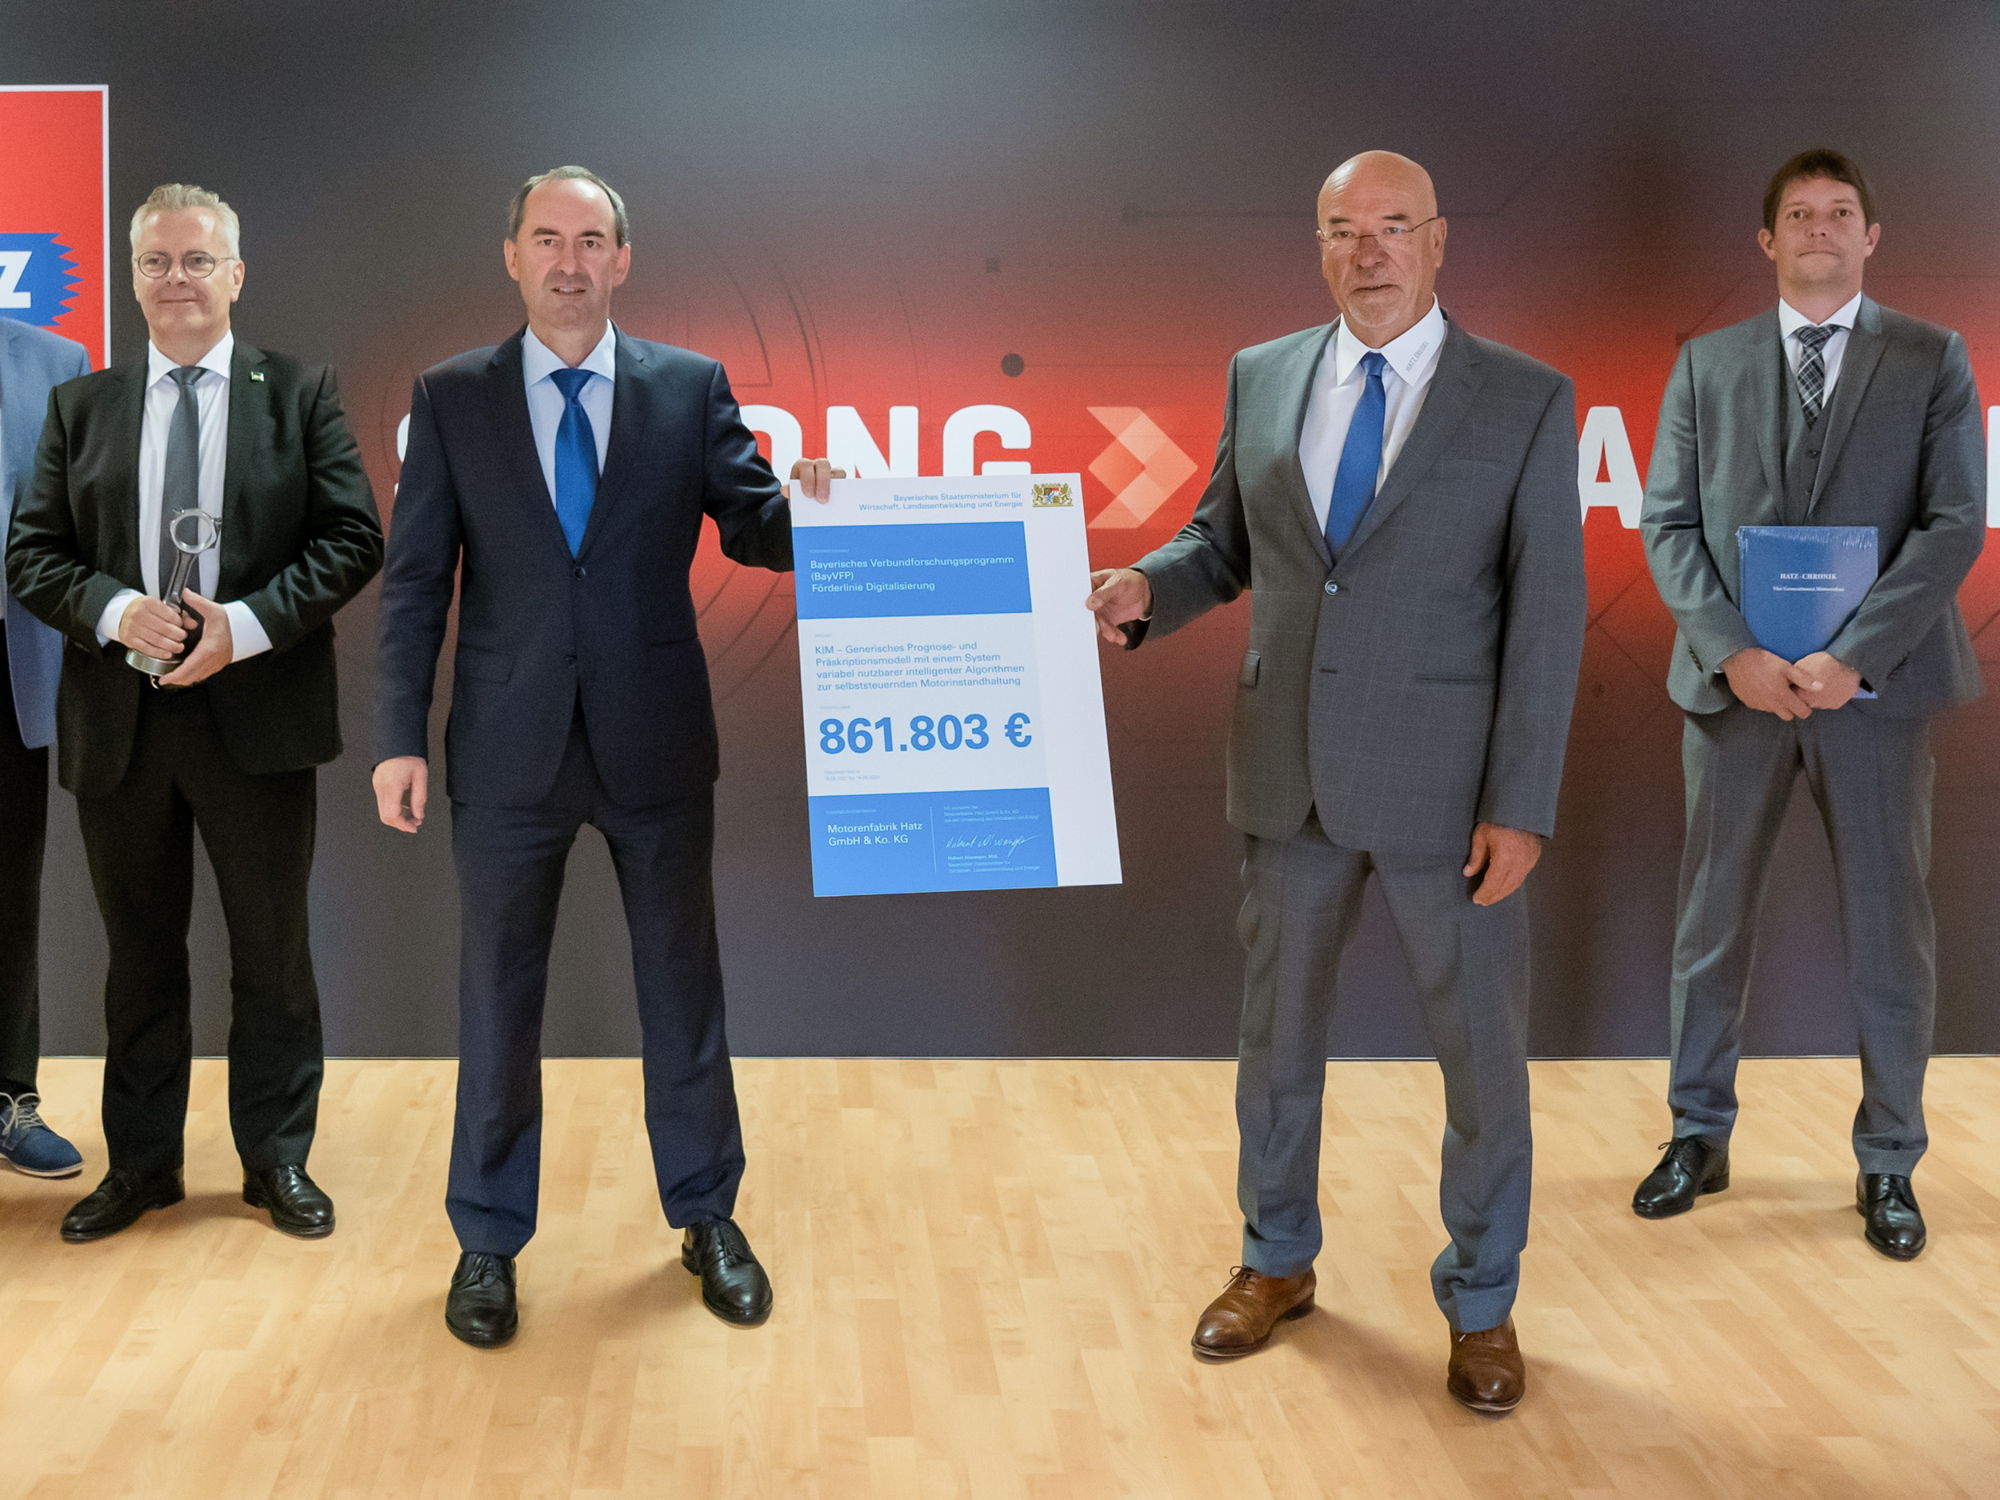 As part of a company visit, the Bavarian Minister for Economic Affairs Hubert Aiwanger (second from left) presents the funding certificate for the joint KIM project to the main shareholder Wolfram Hatz (second from right) as well as CEO Bernd Krüper (left) and CTO Dr.-Ing. Simon Thierfelder.